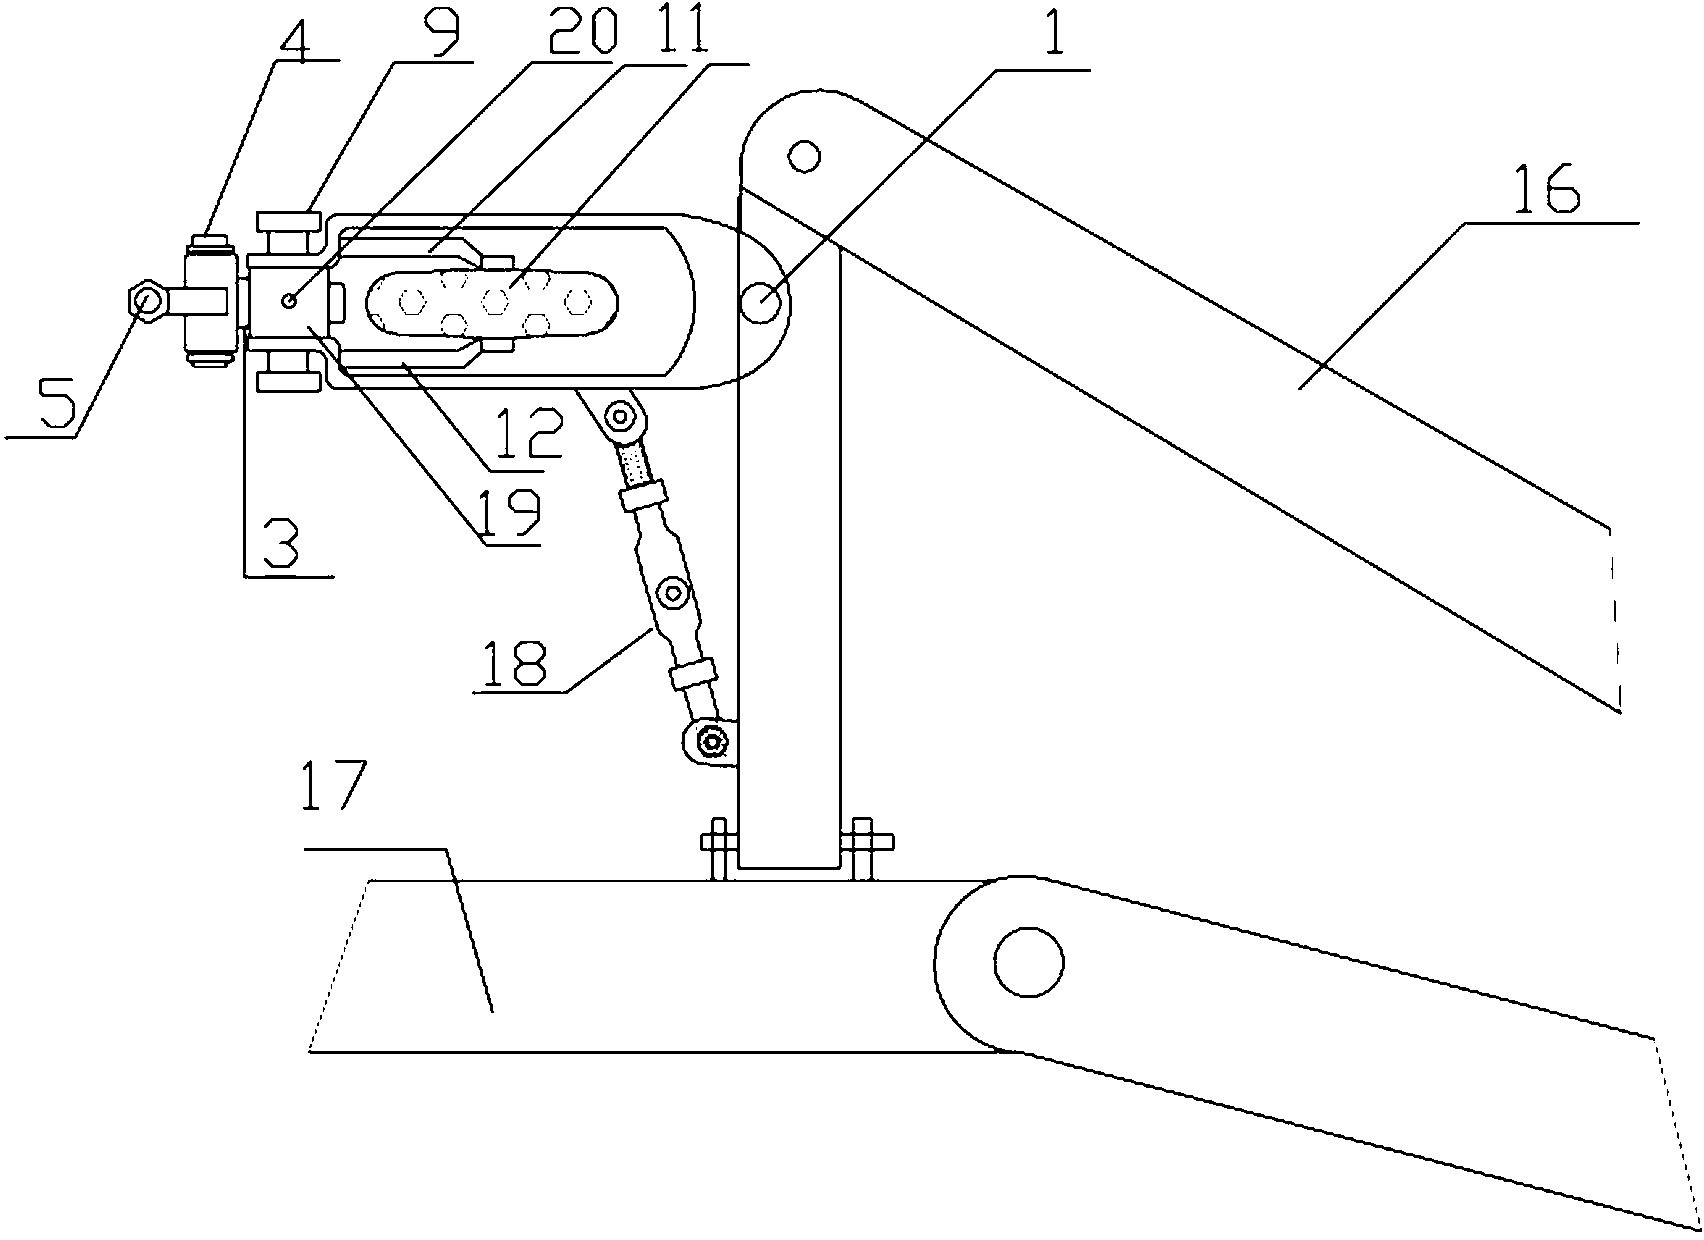 Automatic depth wheel of mounted turnover plow